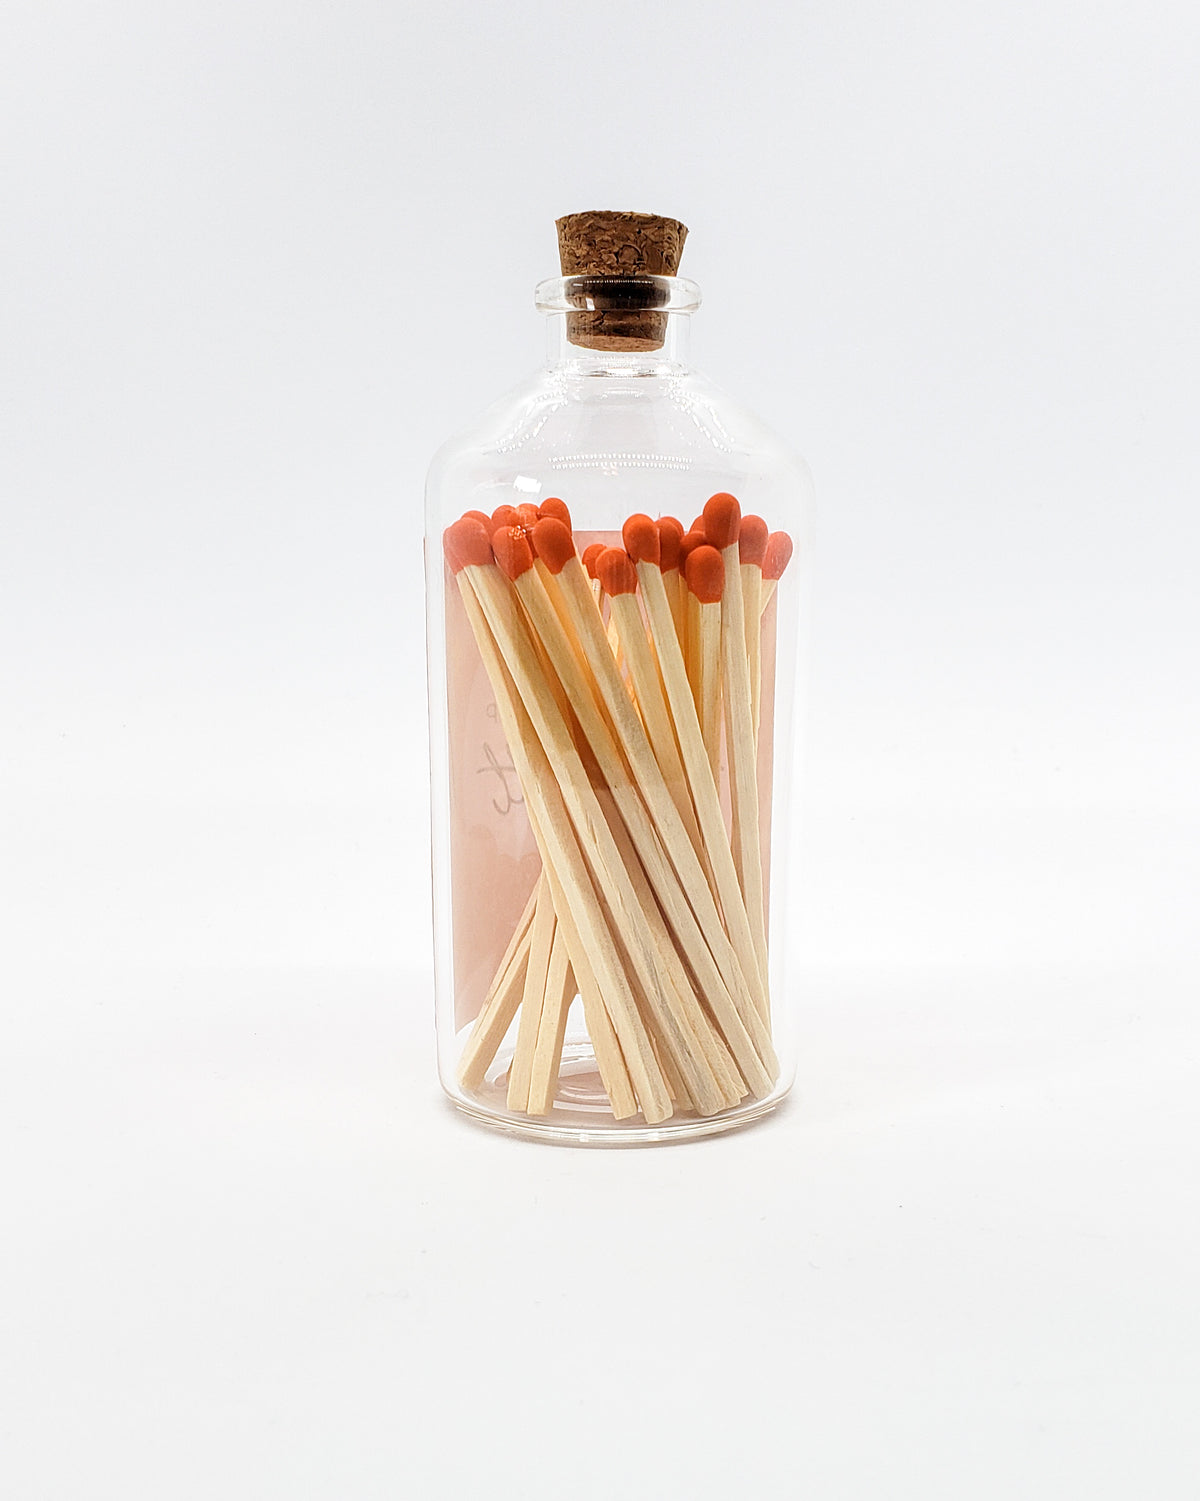 Light Up the Night - Colorful Matches in Glass Jar